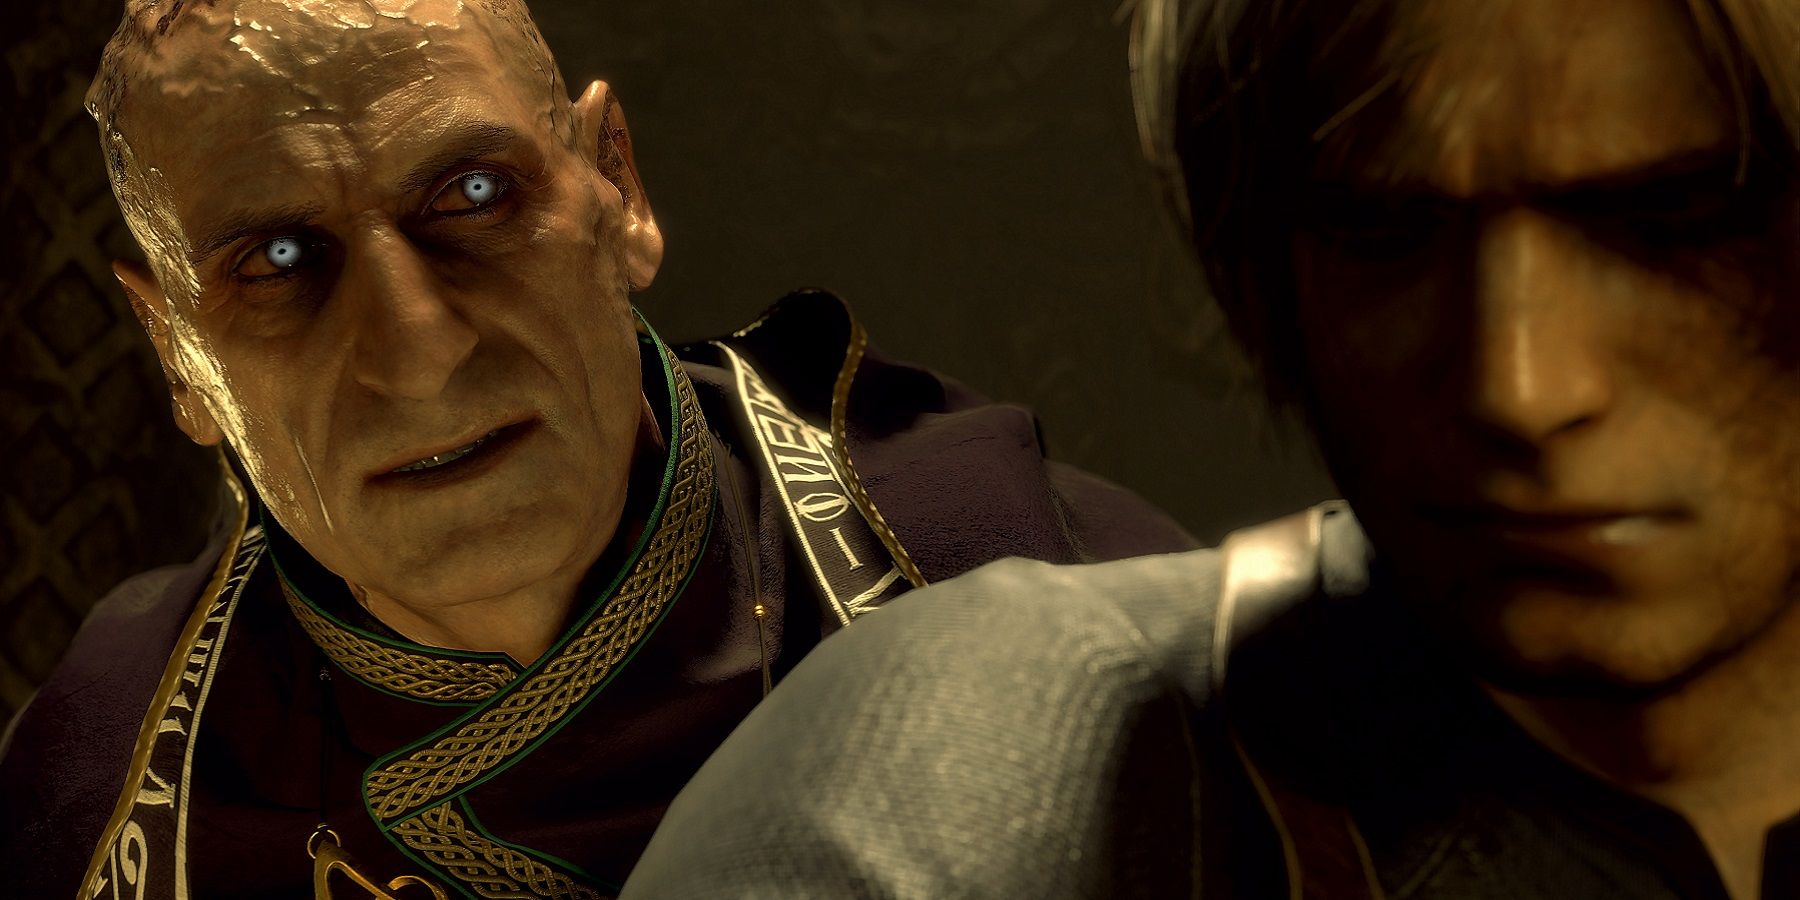 Image from the Resident Evil 4 remake showing Lord Saddler looking over Leon Kennedy's shoulder.